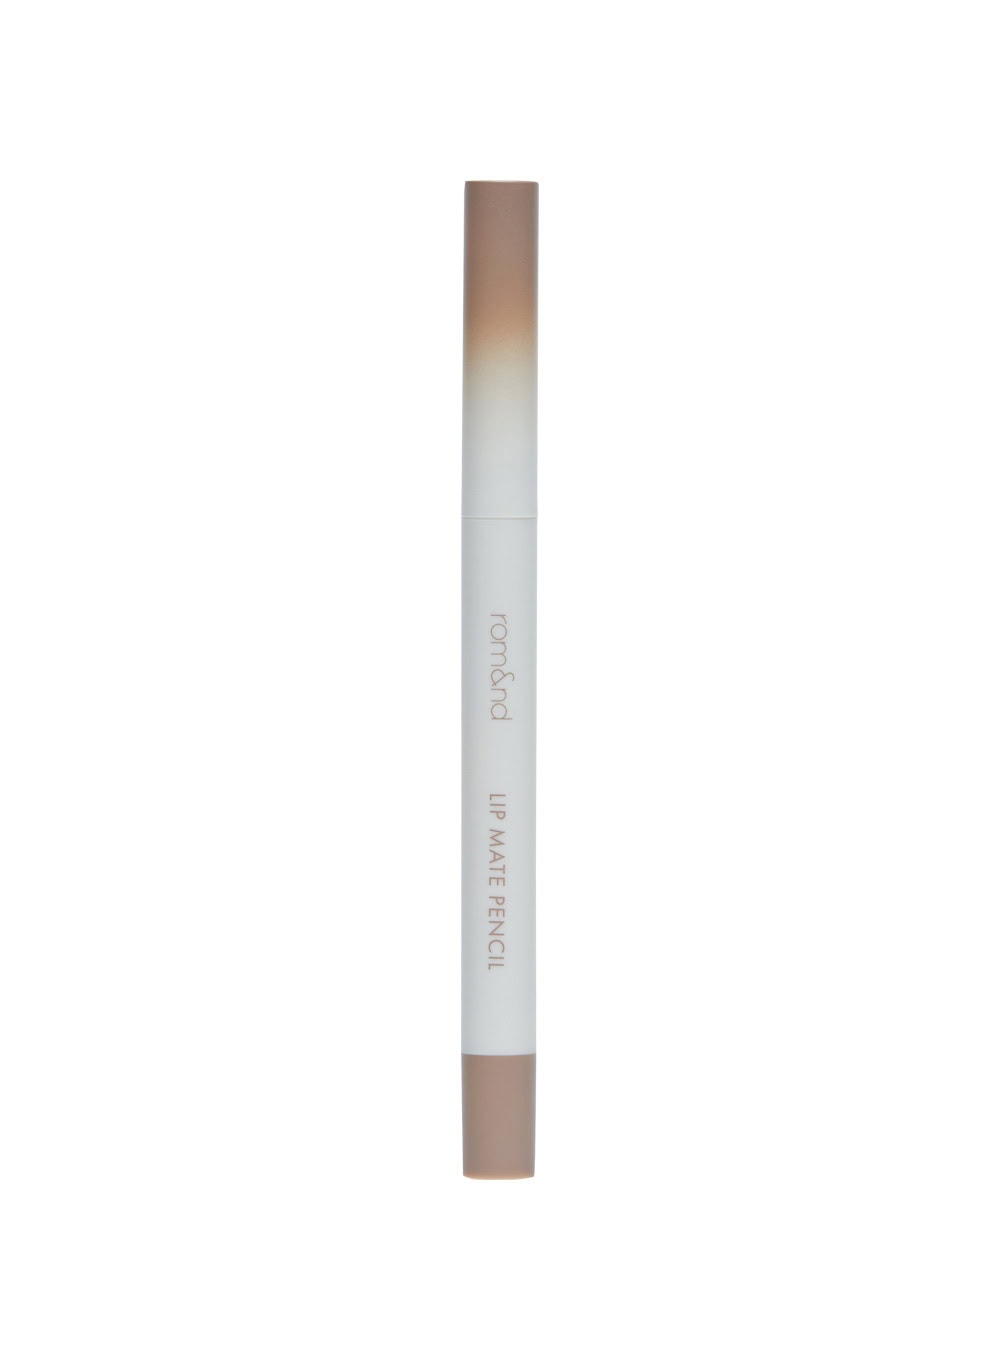 [Rom&nd] Lip Mate Pencil (0.5g) - 05 TAUPEY SHADE